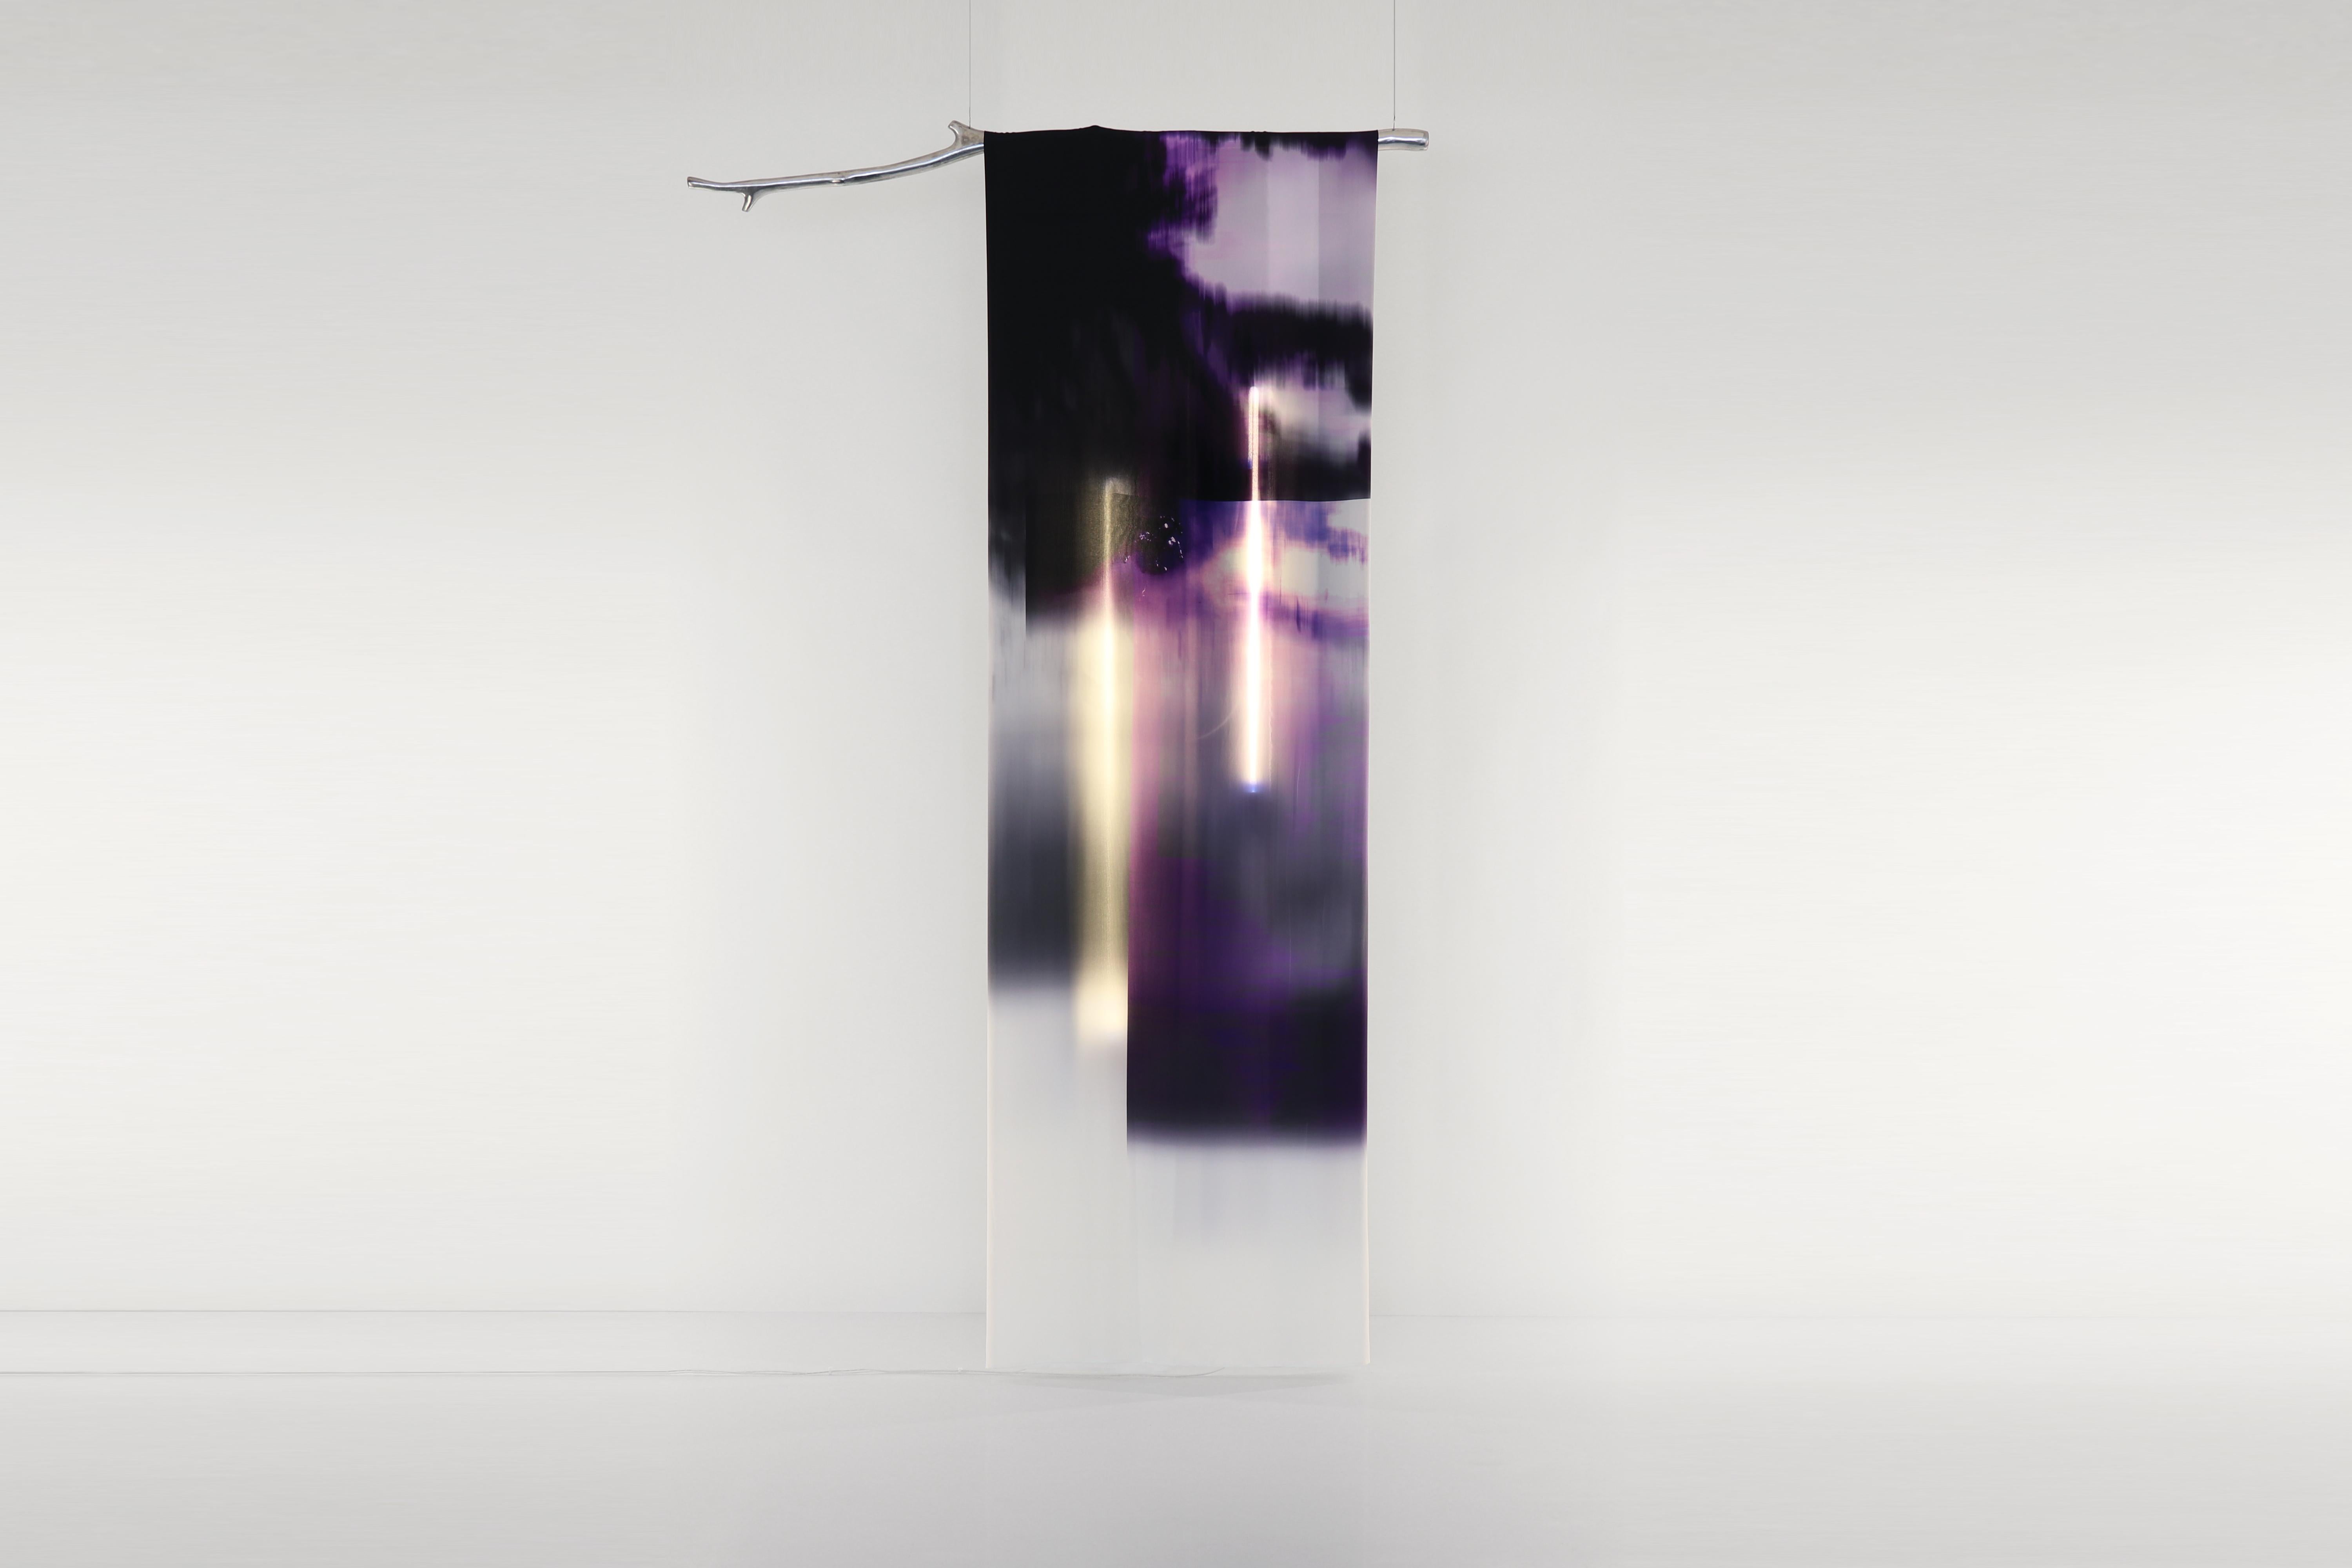 Hong Kong Longing for the Space Between Stars Purple Fabric Light by Batten and Kamp